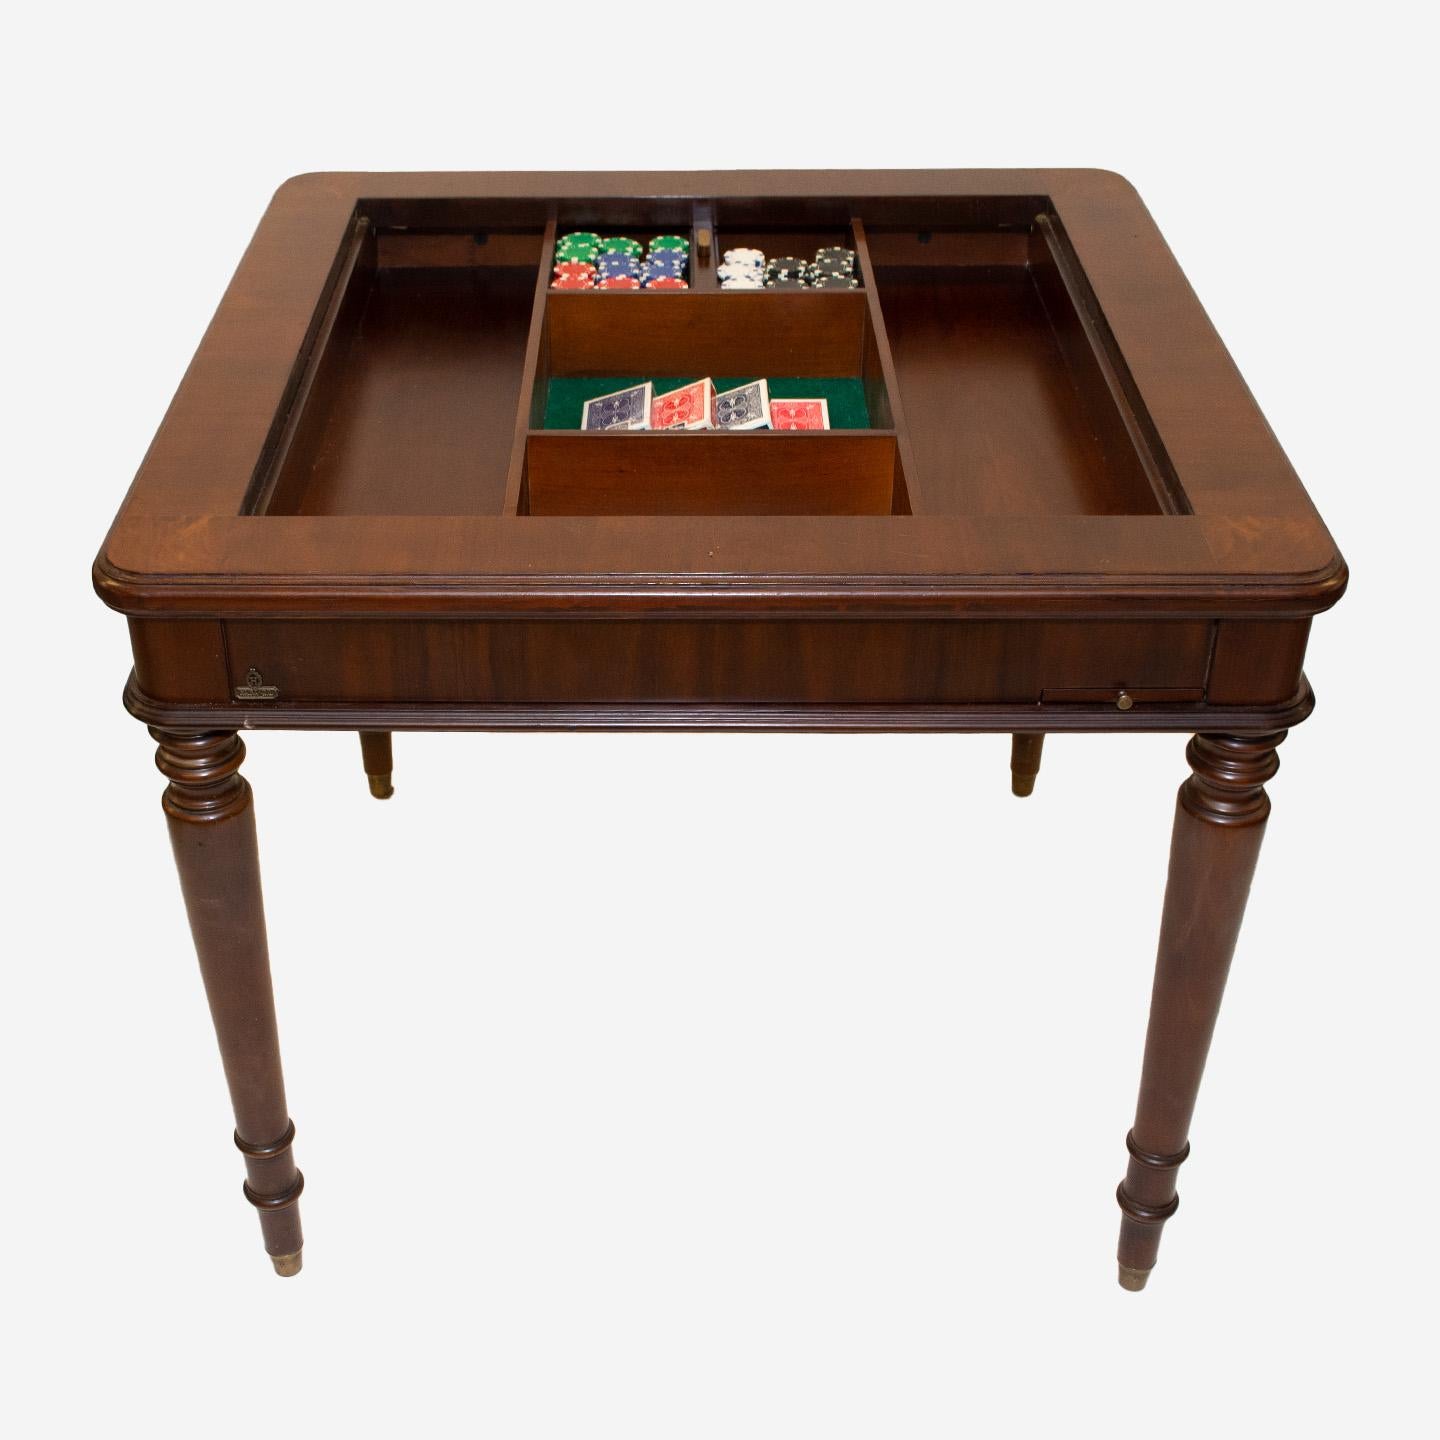 Designed by Francisco Hurtado, this classic square game table was manufactured in Spain by Hurtado Valencia in the 1990s. Constructed in walnut, the board lifts off with the aid of a simple pull mechanism, to reveal a hidden storage compartment. The